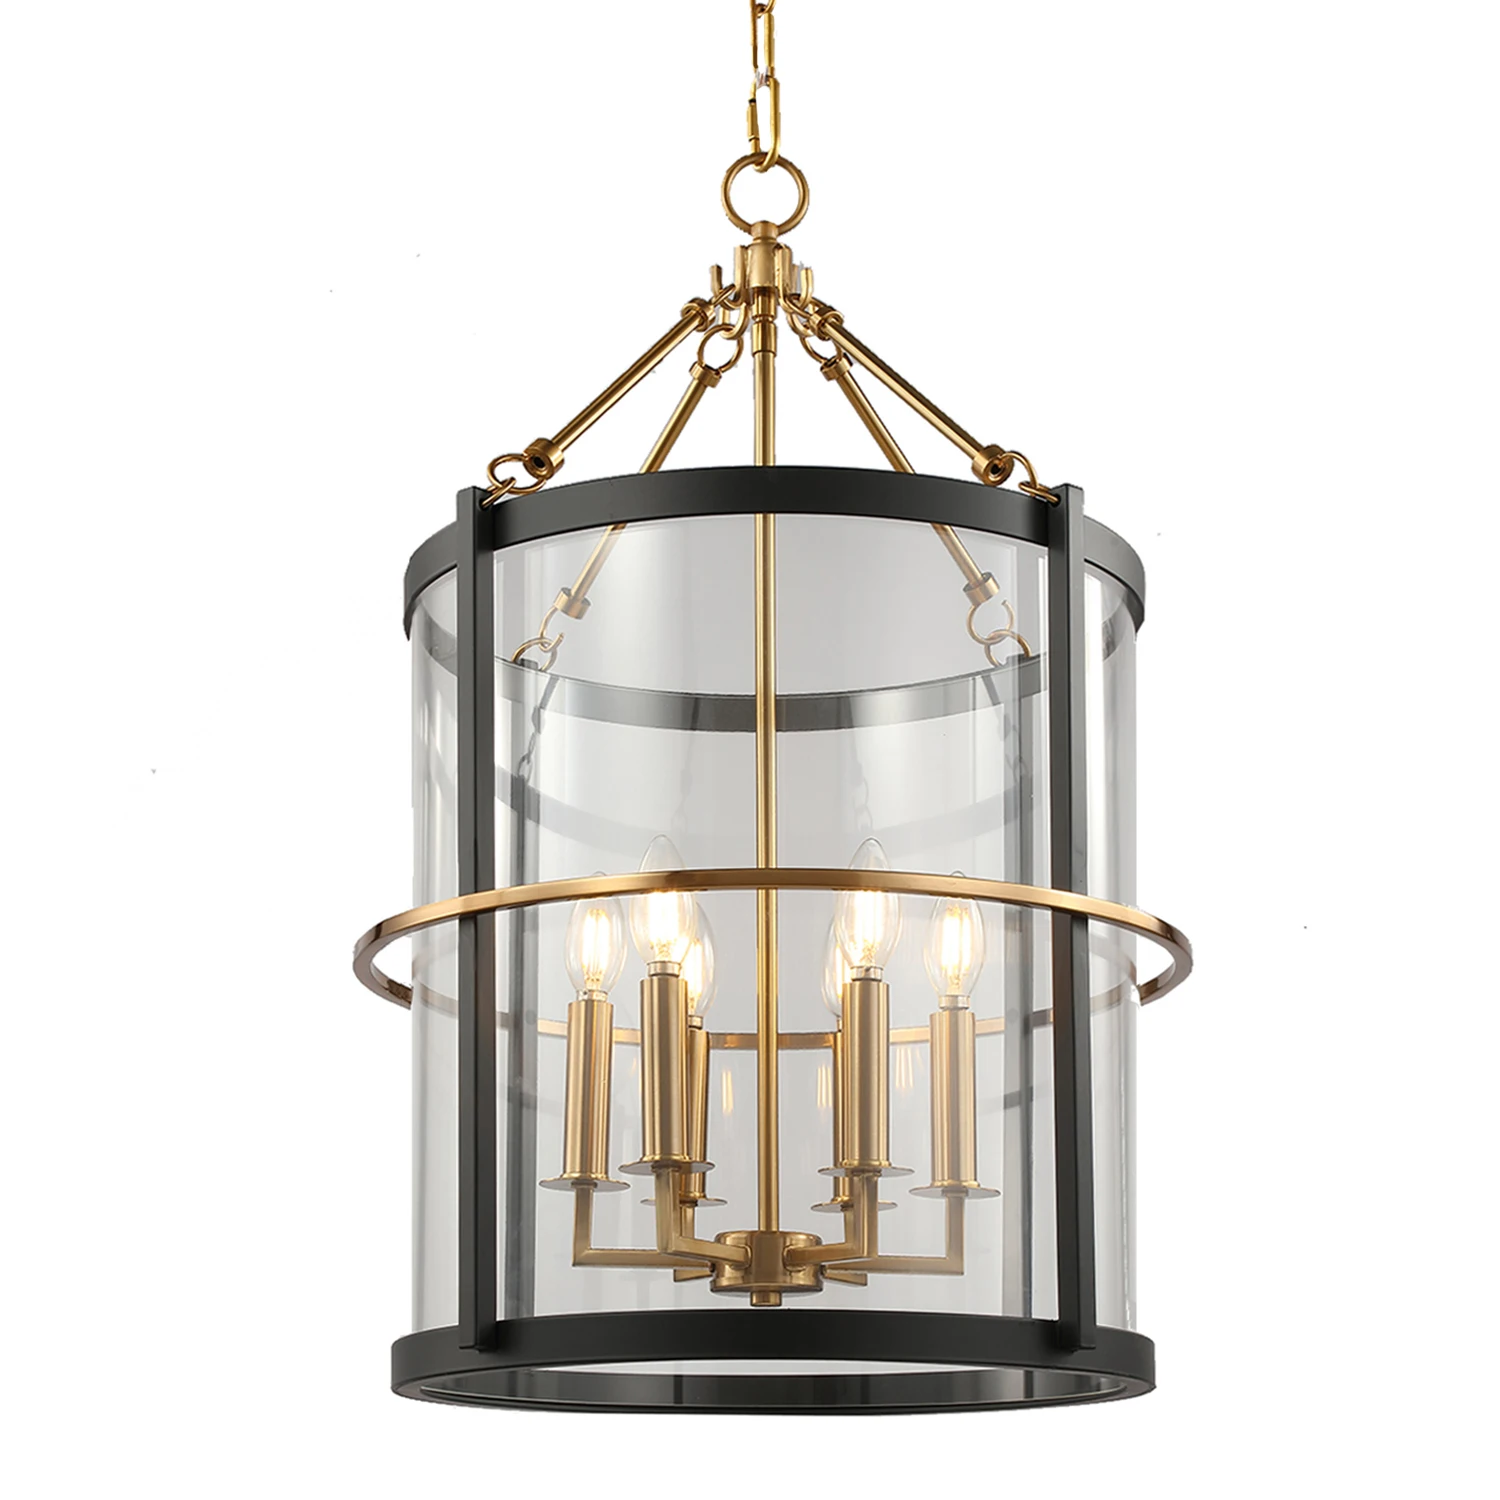 2020 Modern Iron Black & Brass Finish Clear Glass Pendant Lamp Black Pendant Lights for Home Decorate your Home Ceiling Light